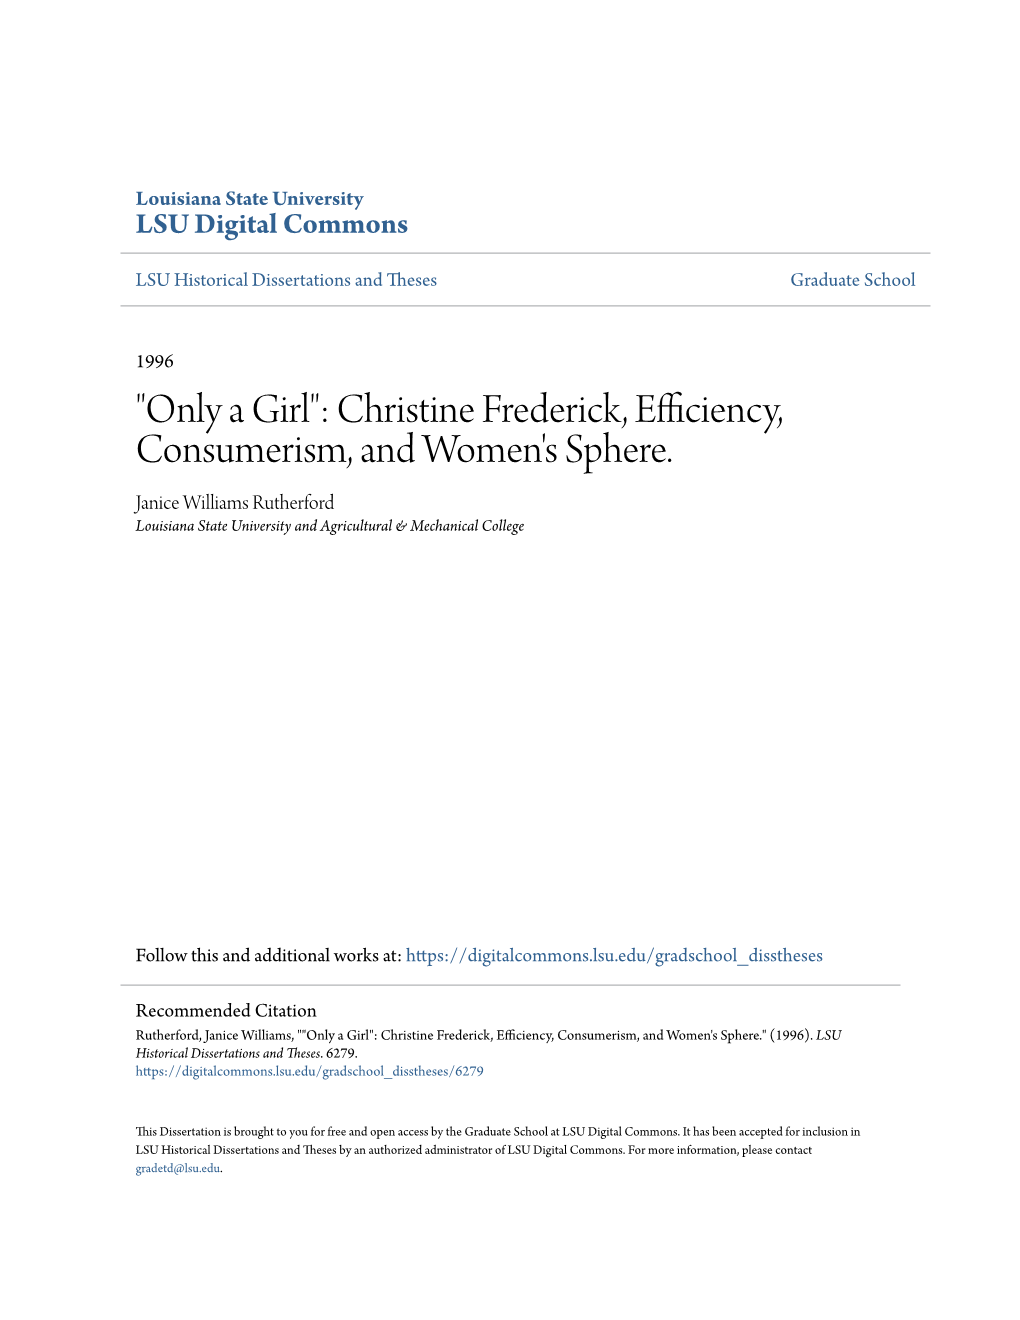 Christine Frederick, Efficiency, Consumerism, and Women's Sphere. Janice Williams Rutherford Louisiana State University and Agricultural & Mechanical College